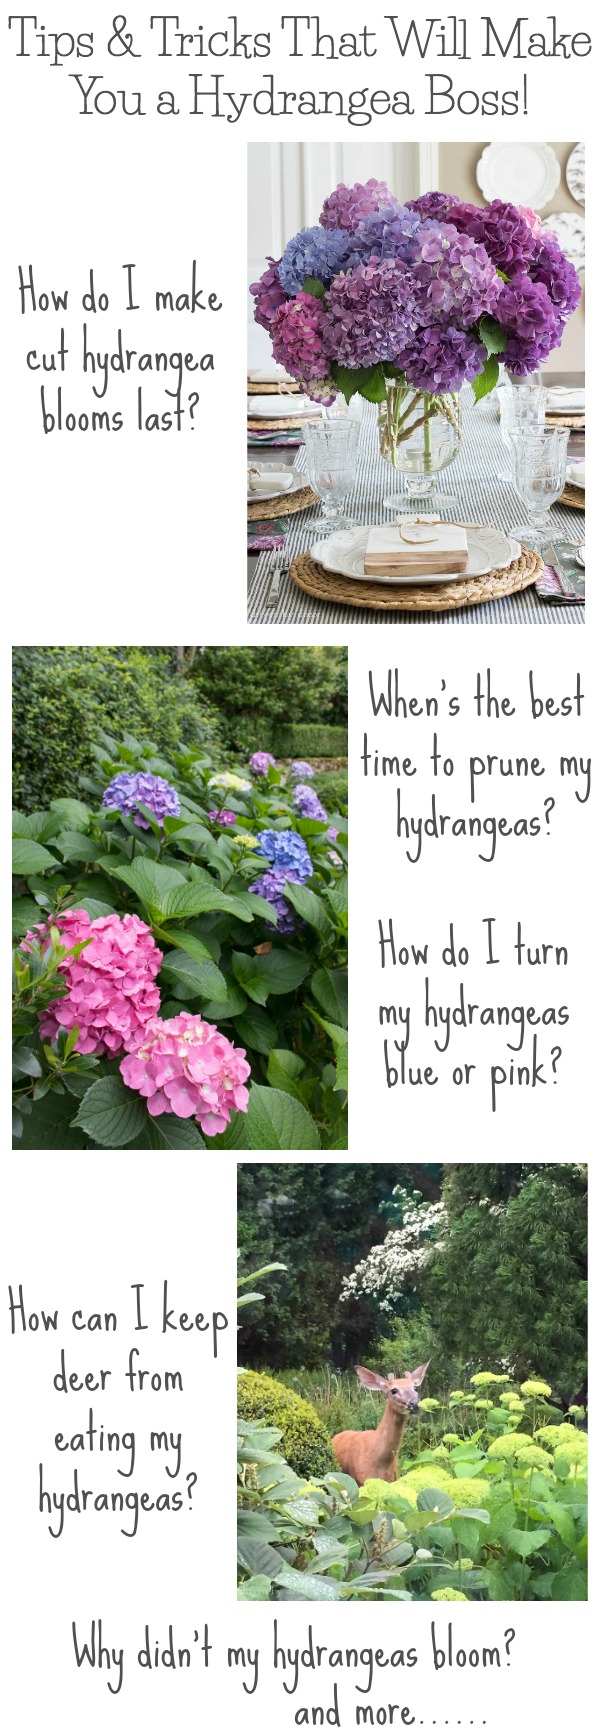 Sooo many awesome tips for growing hydrangeas! When to prune and how much to prune them, how to change their color, how to make cut hydrangea blooms last, and more! Also explains why your hydrangea plants might not bloom!